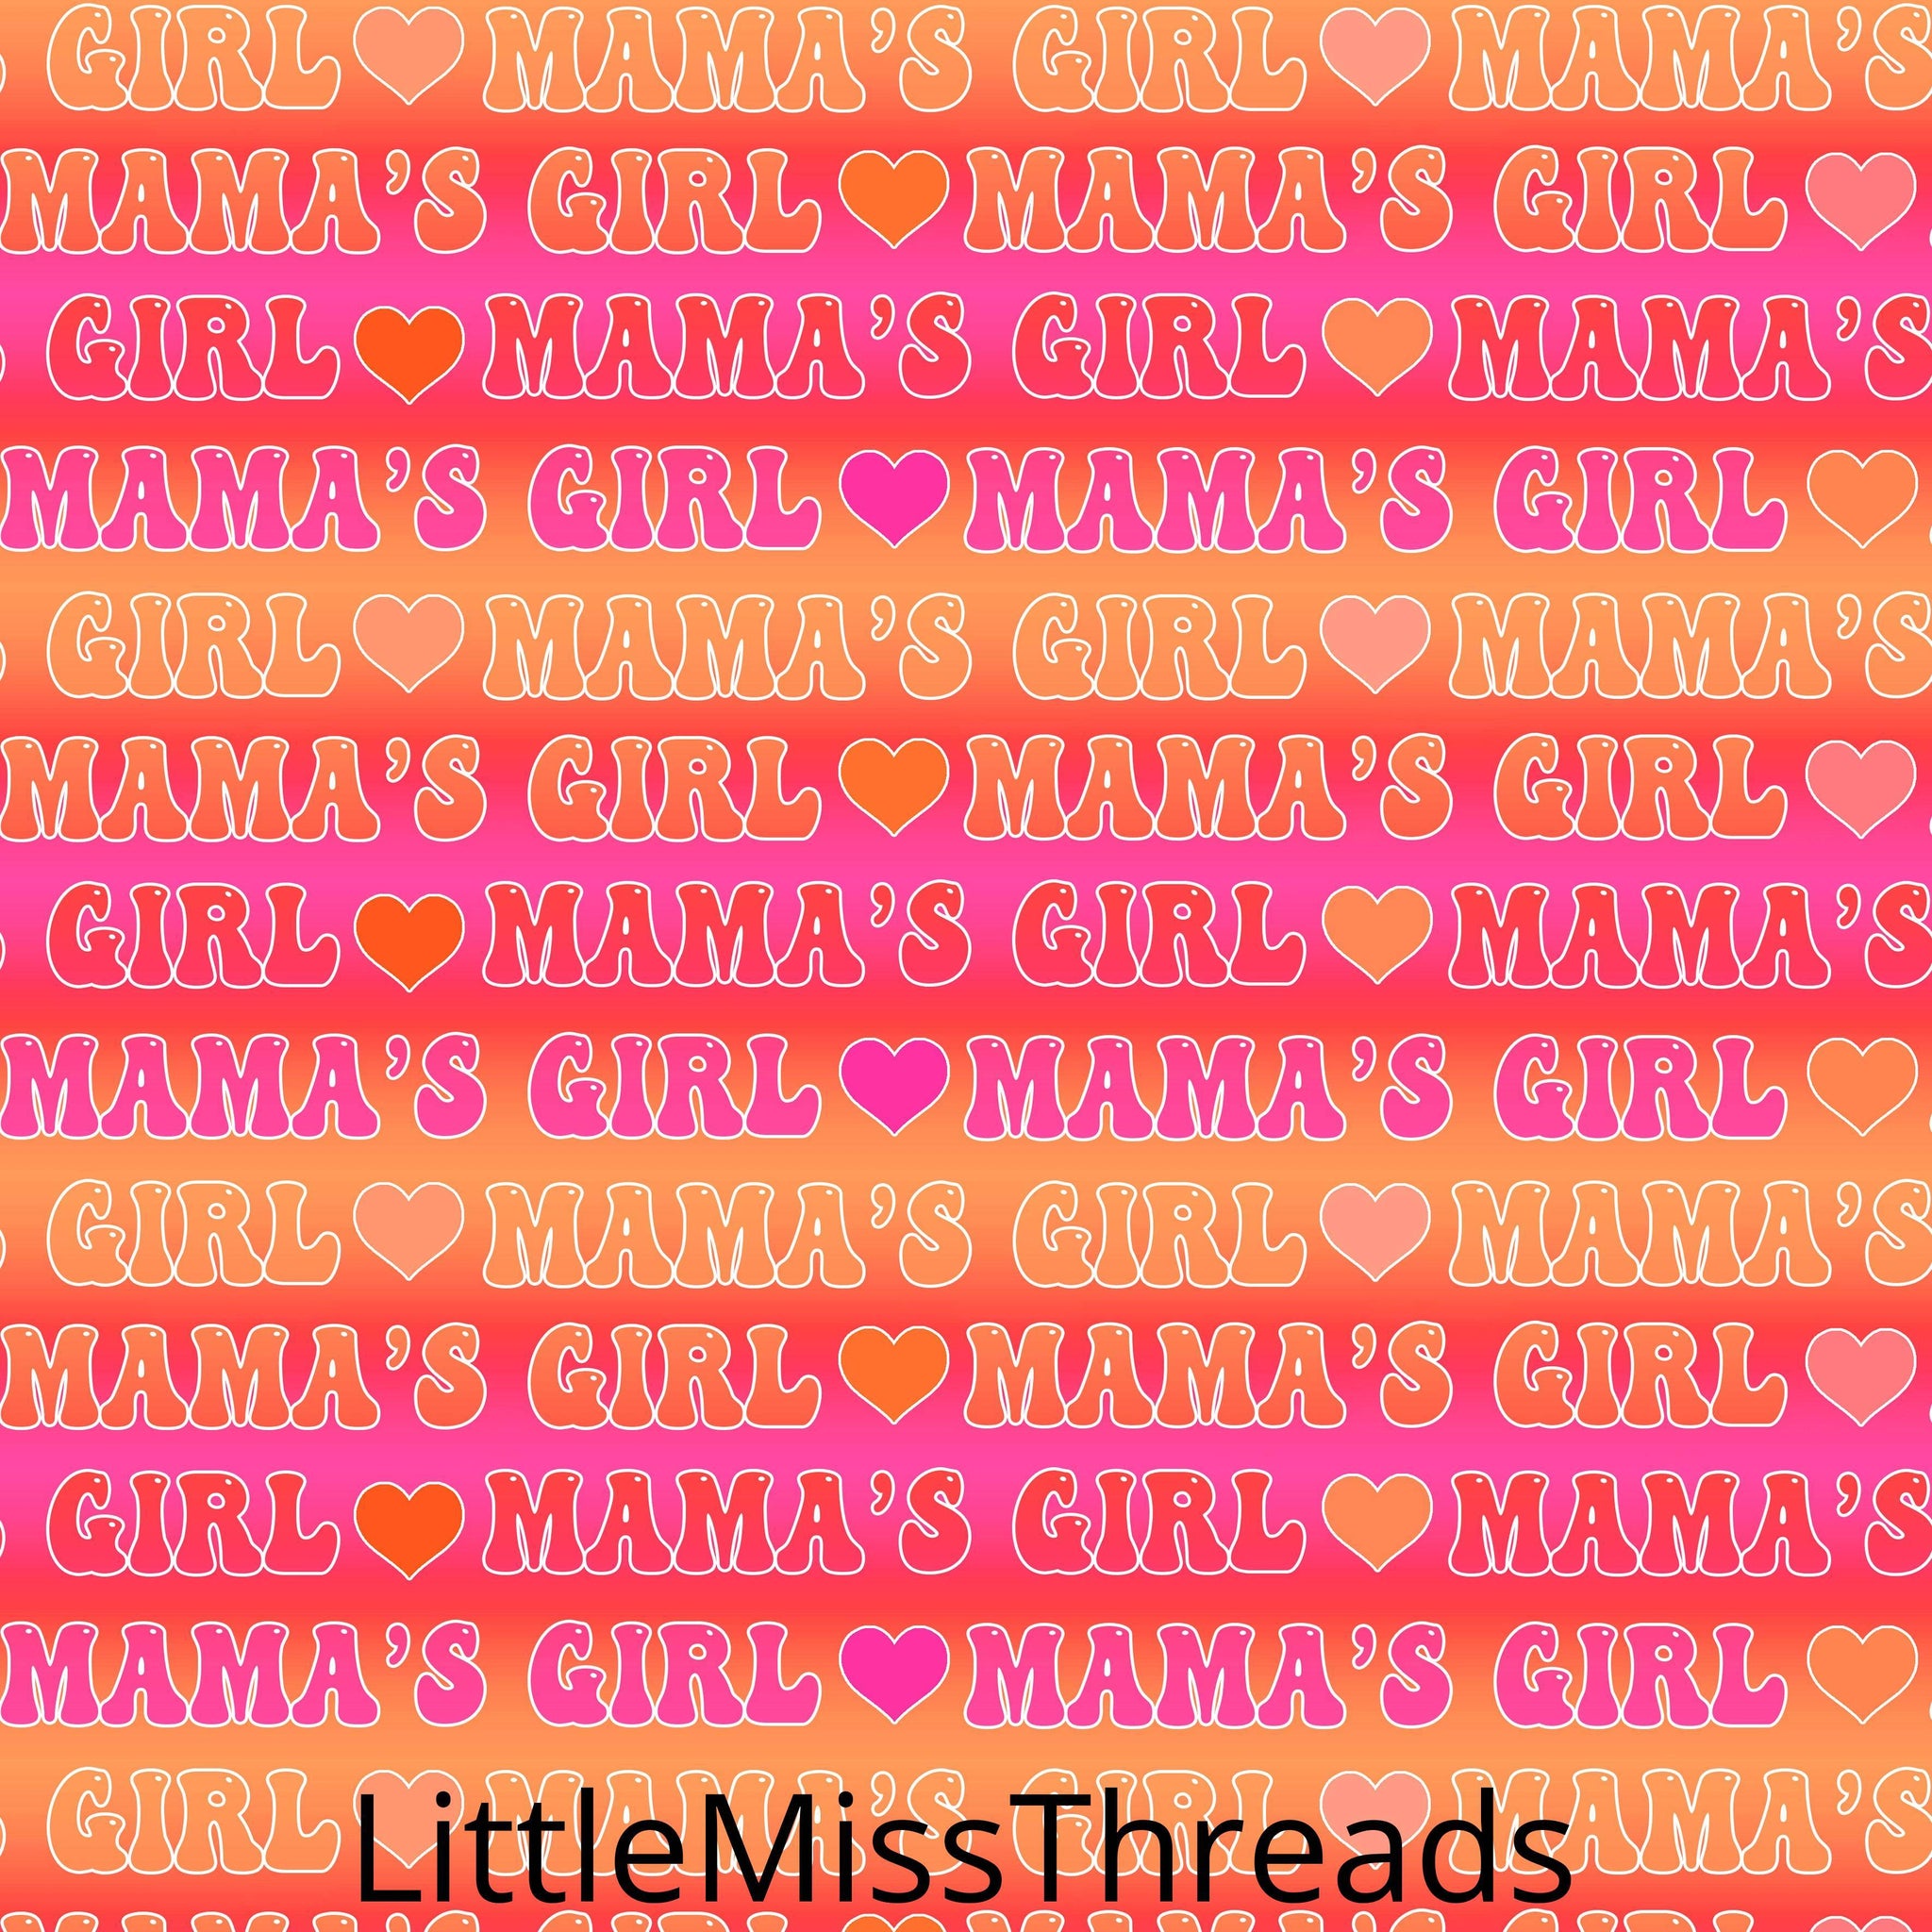 PRE ORDER - Mamma's Girl - Fabric - Fabric from [store] by Little Miss Threads - 